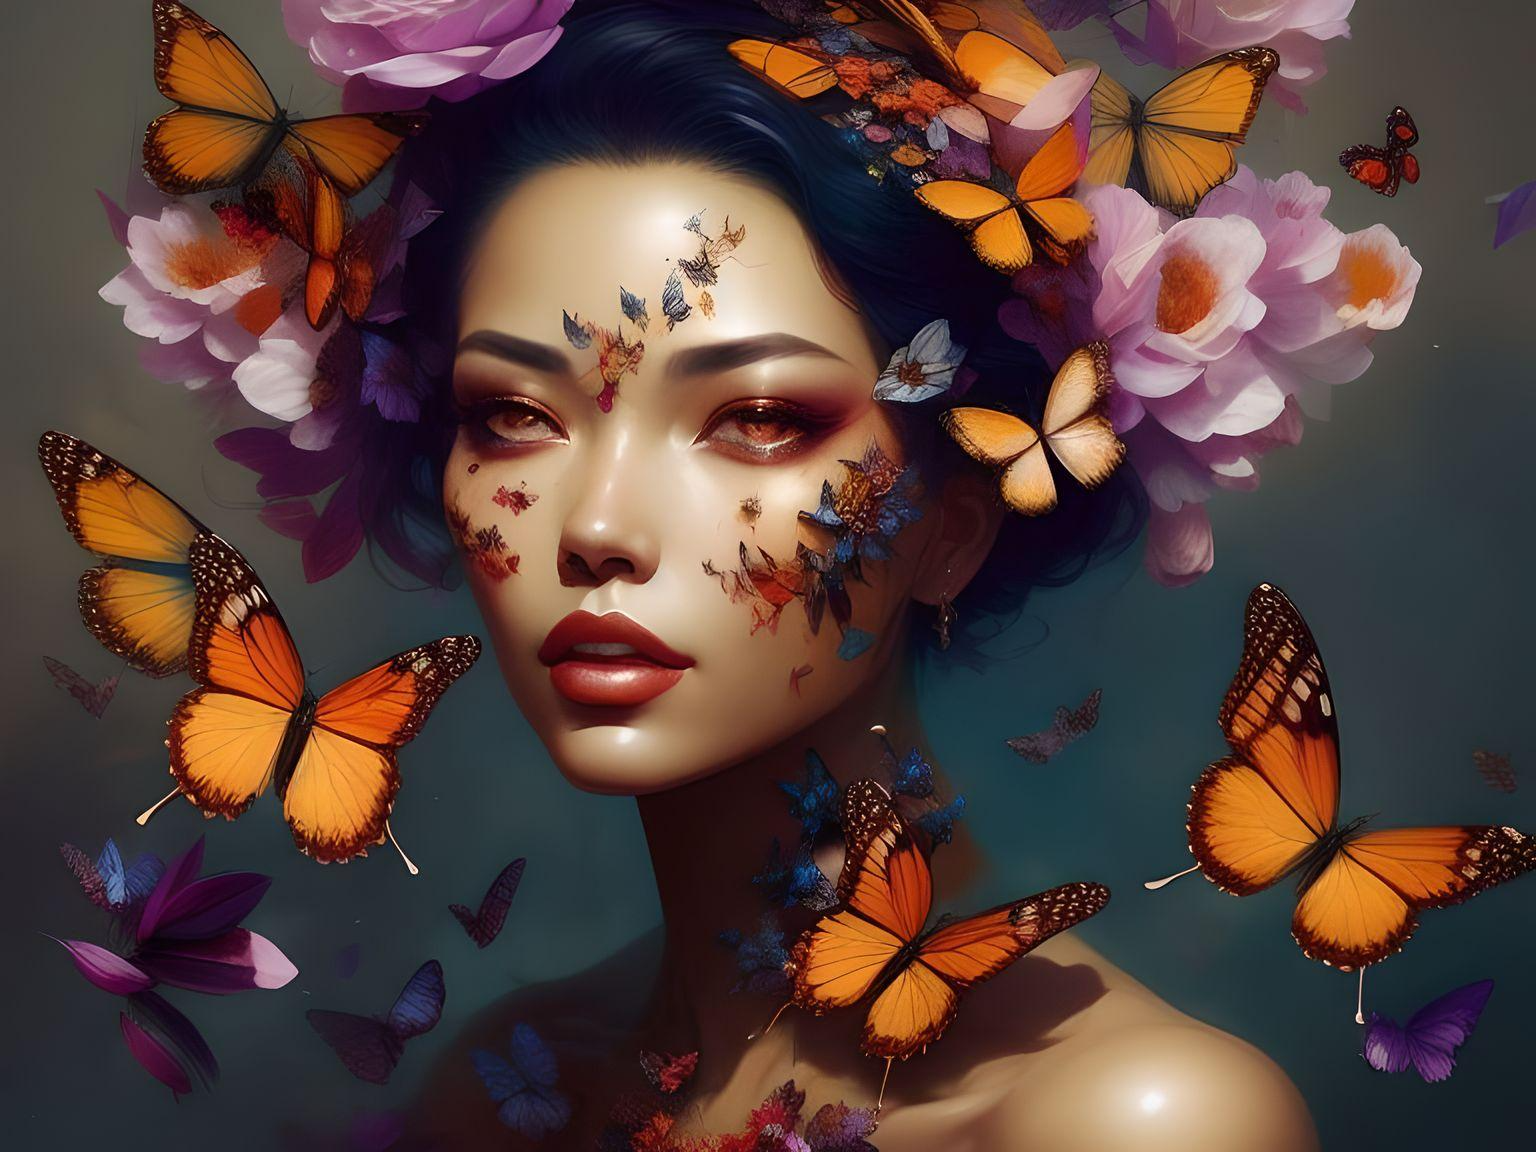 a concept art illustration of a girl with many butterflies